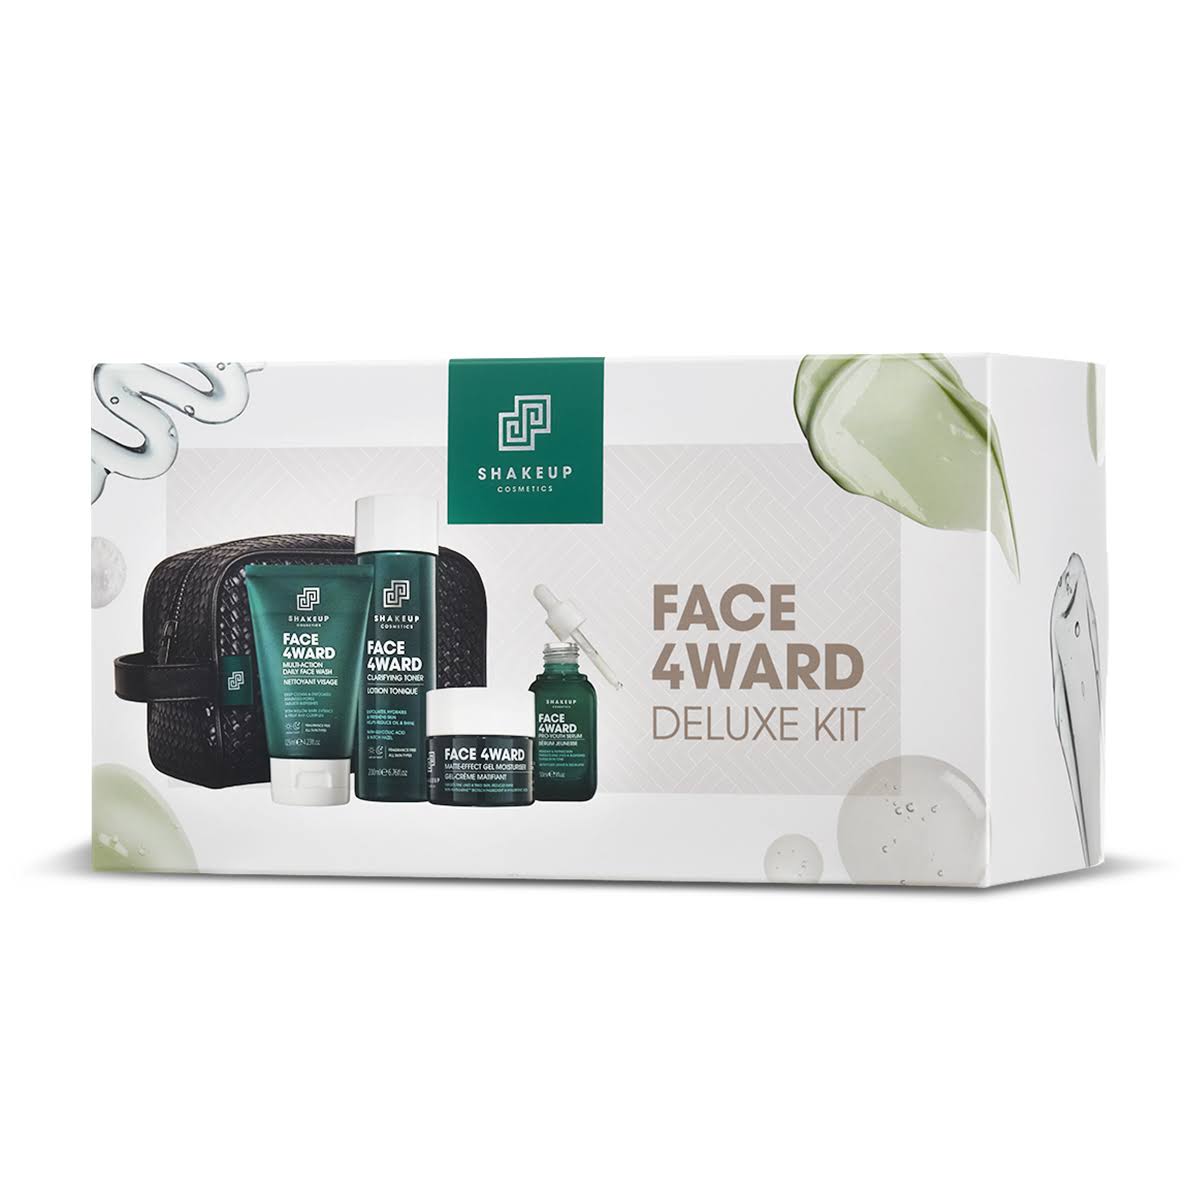 An image of Face 4ward Deluxe Kit | Skincare for Men | Shakeup Cosmetics